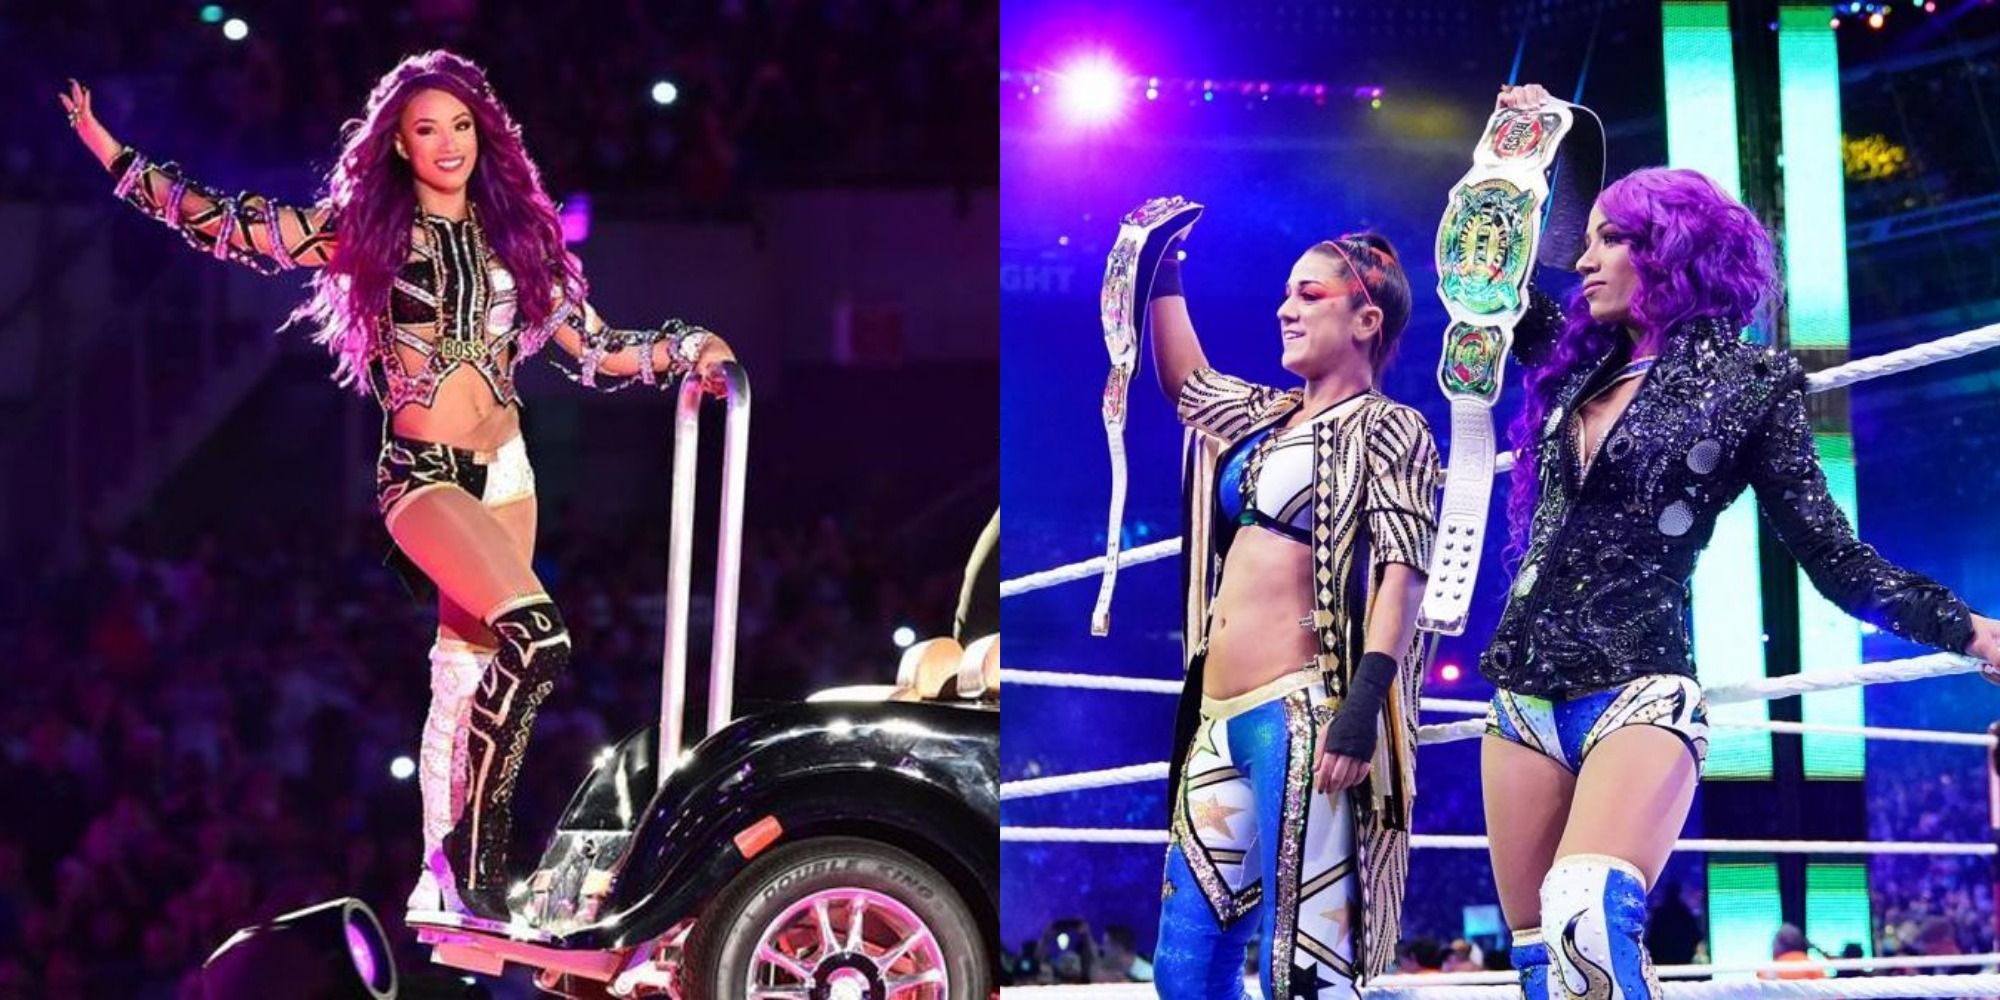 Sasha Banks makes her entrance at WrestleMania 33/Holds up the Tag Titles with Bayley at WrestleMania 35